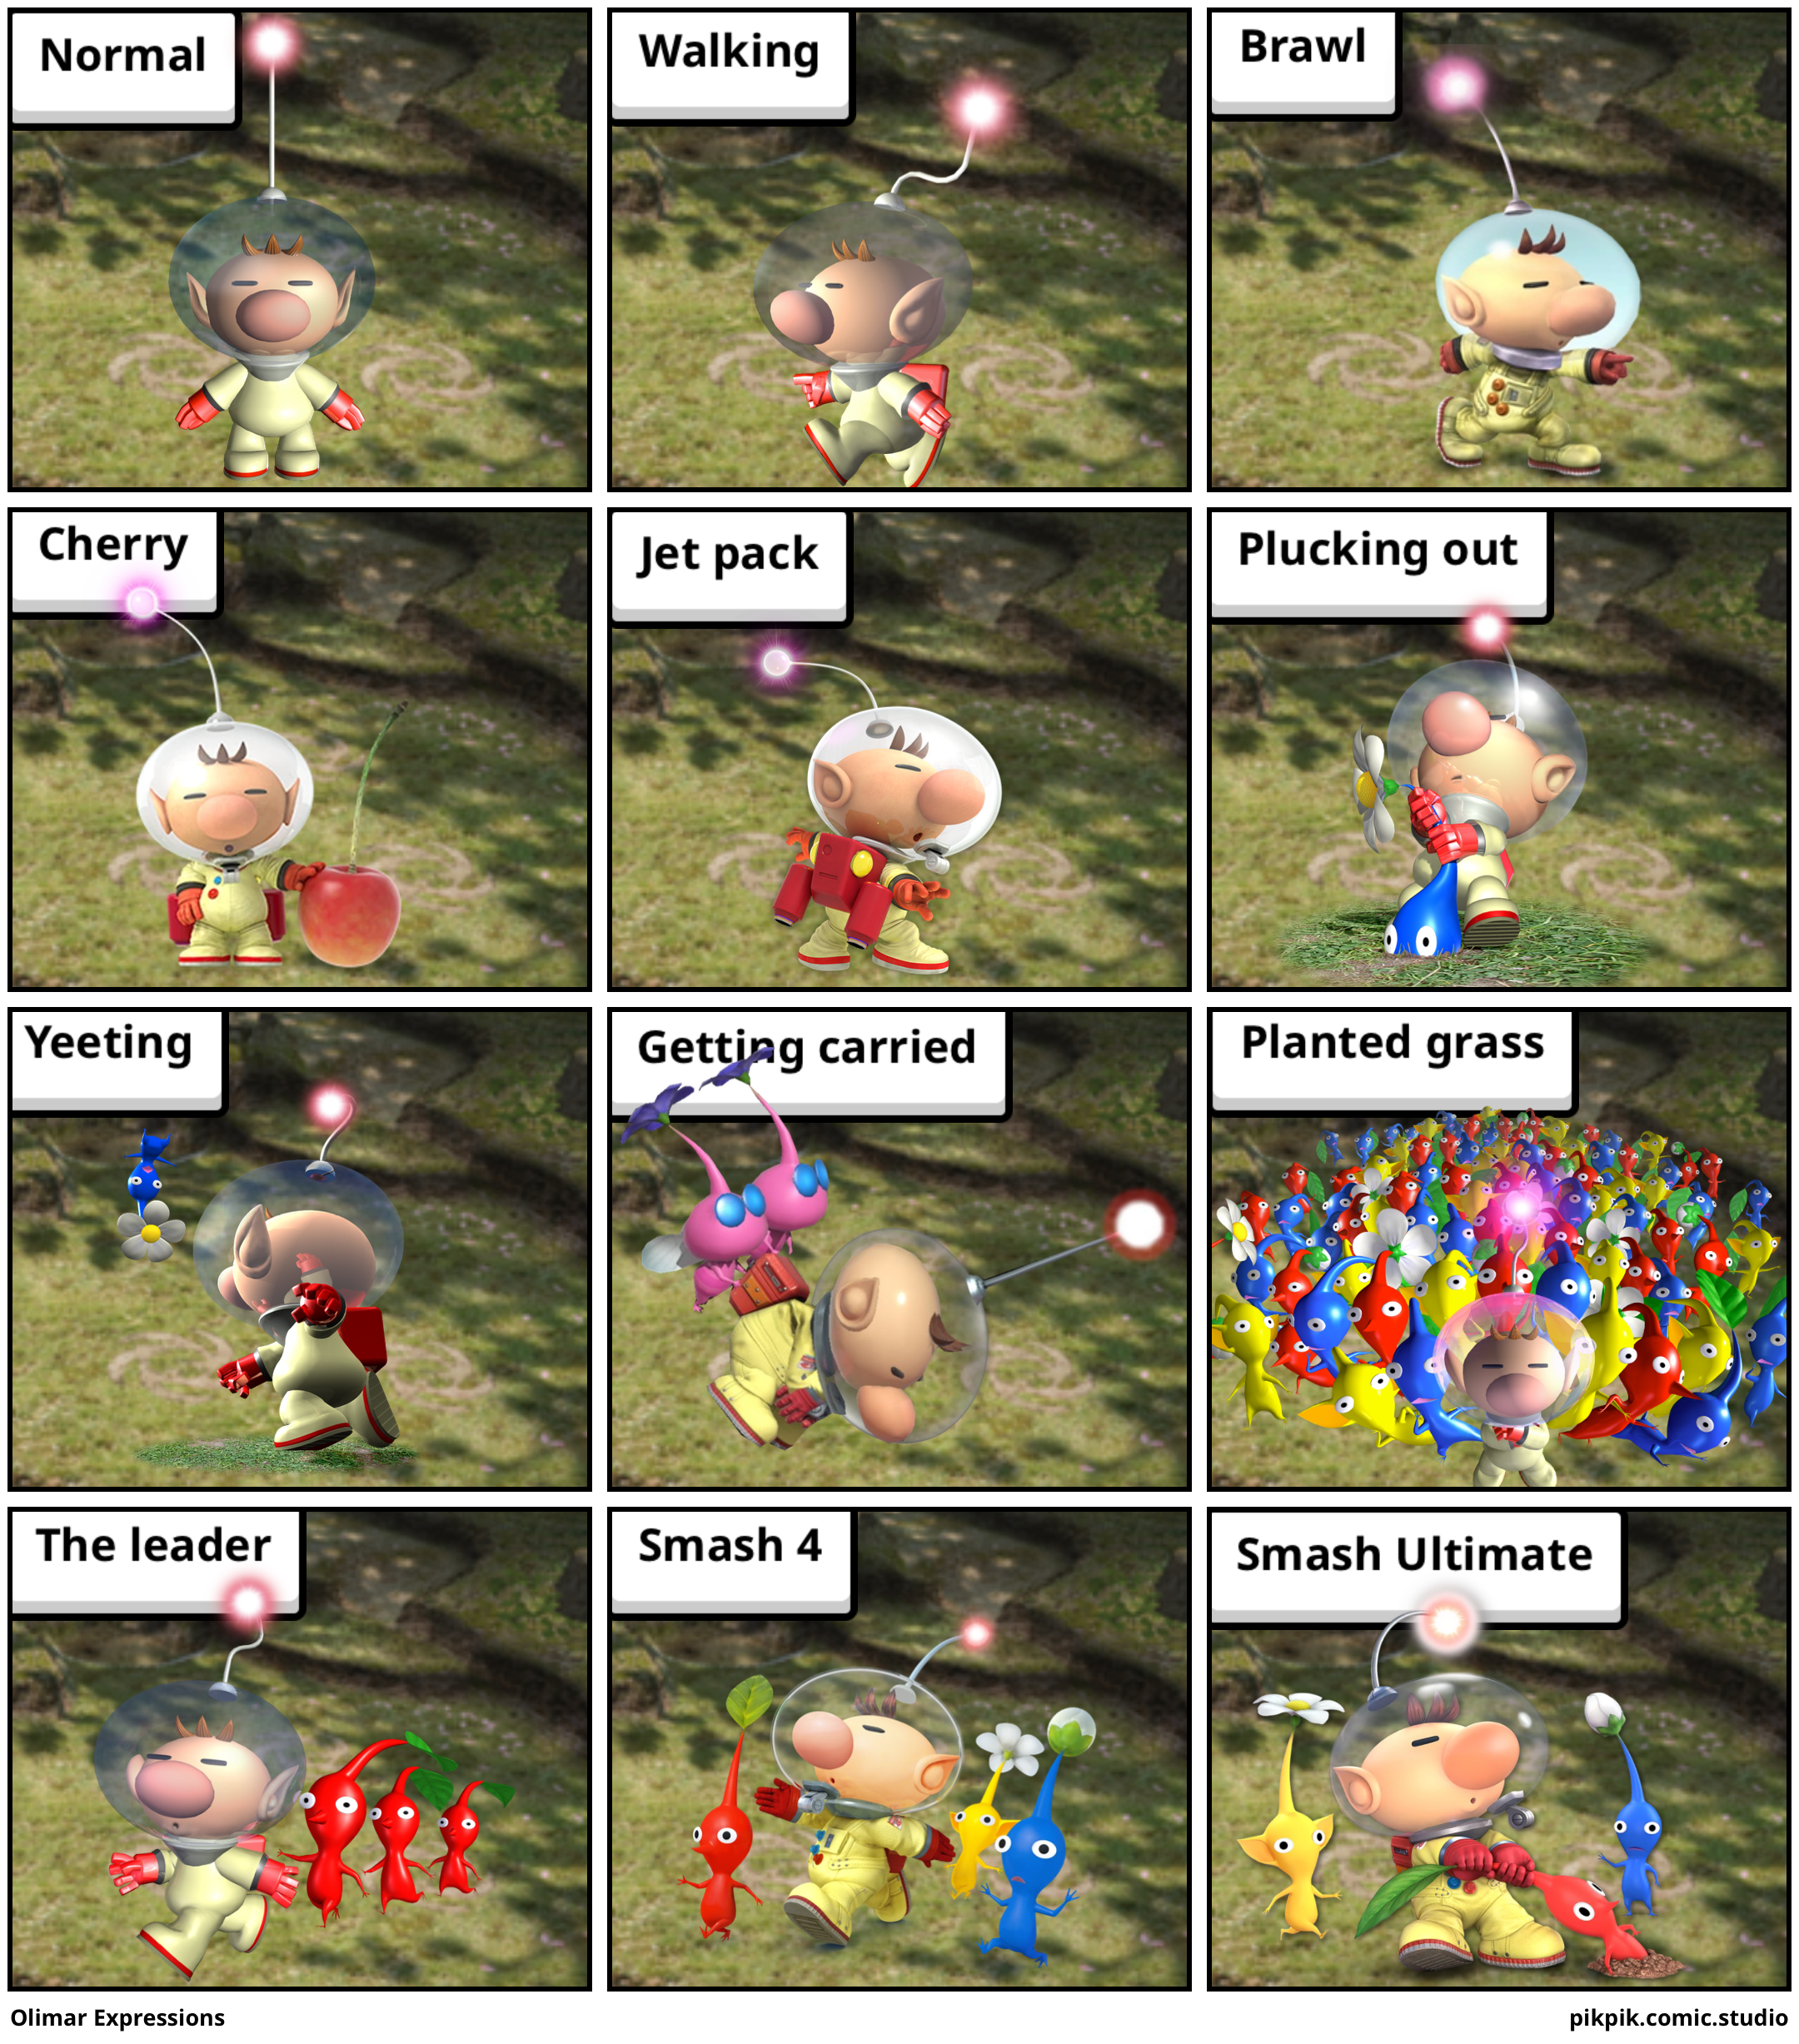 Olimar Expressions